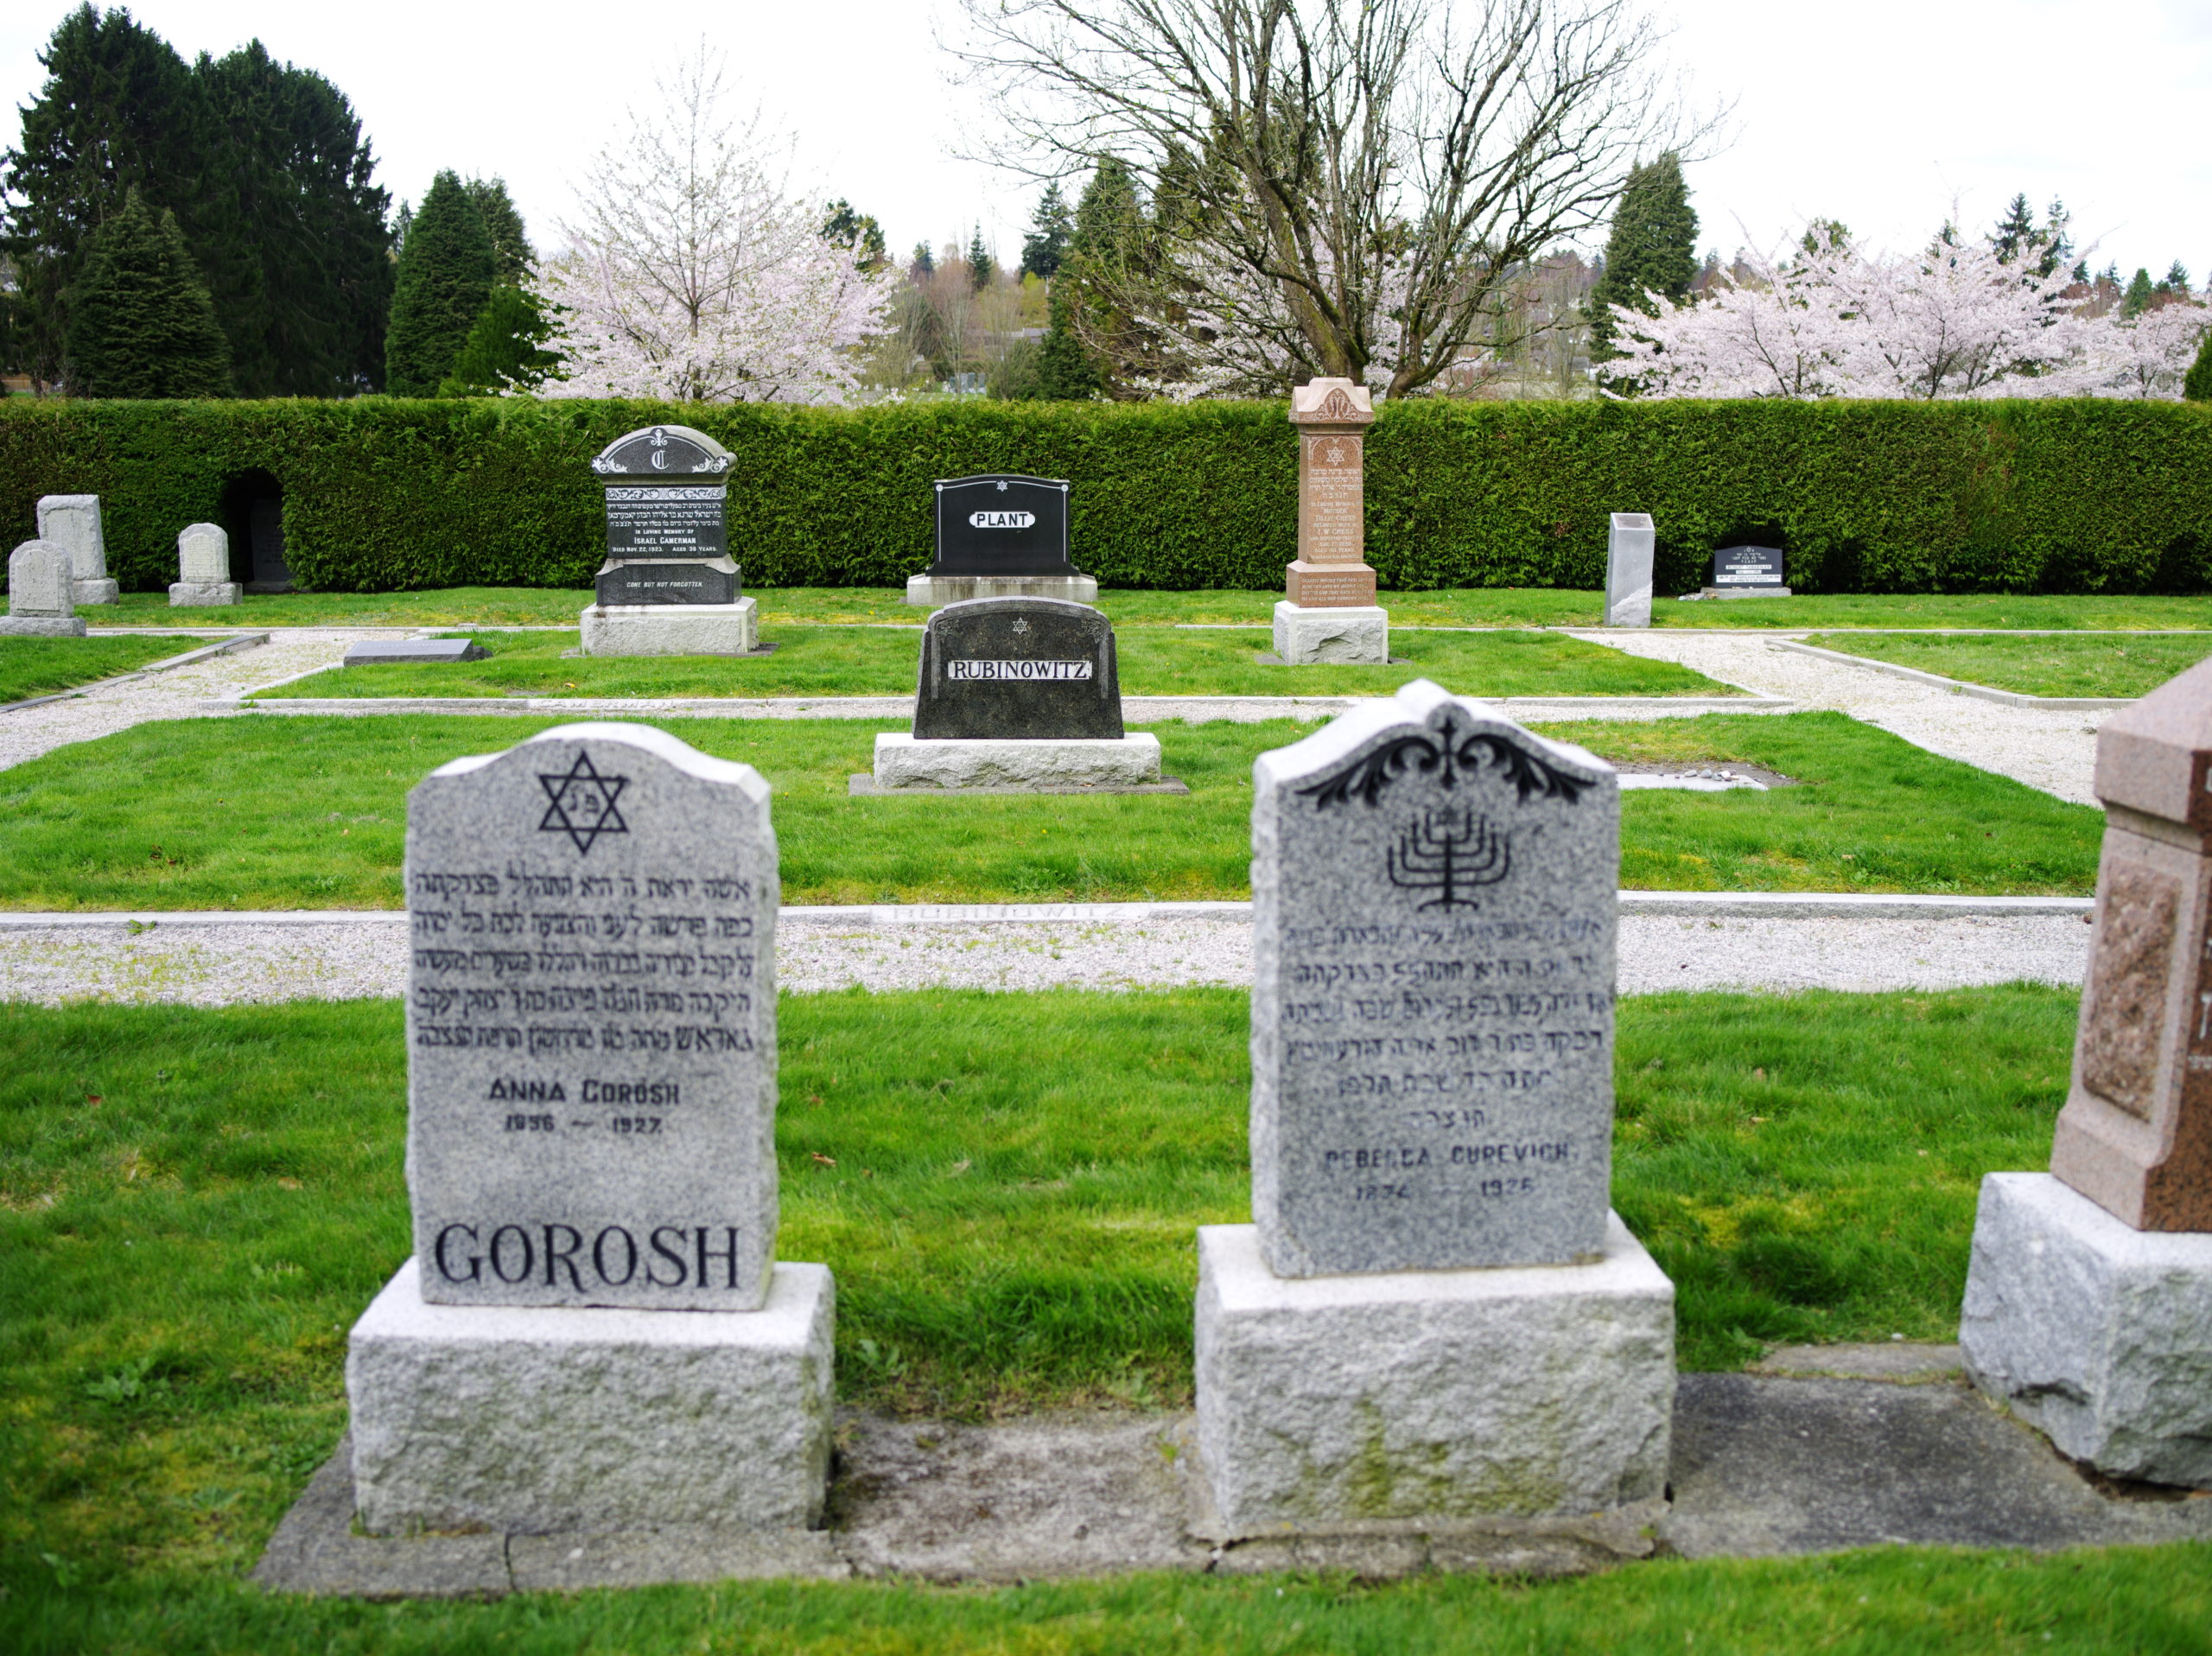 Image Description: Headstones are arranged in grass rectangles in the Jewish Cemetery grounds. All headstones have rectangular bases with rough sides and smooth tops that the headstones sit on. 3 light coloured headstones are clustered together in the left corner, furthest away from the camera. There is a mix of Hebrew and English writing on the Headstones. Cherry blossom branches are visible above the hedgeline along the back of the Jewish Cemetery border, framed by dense foliage.